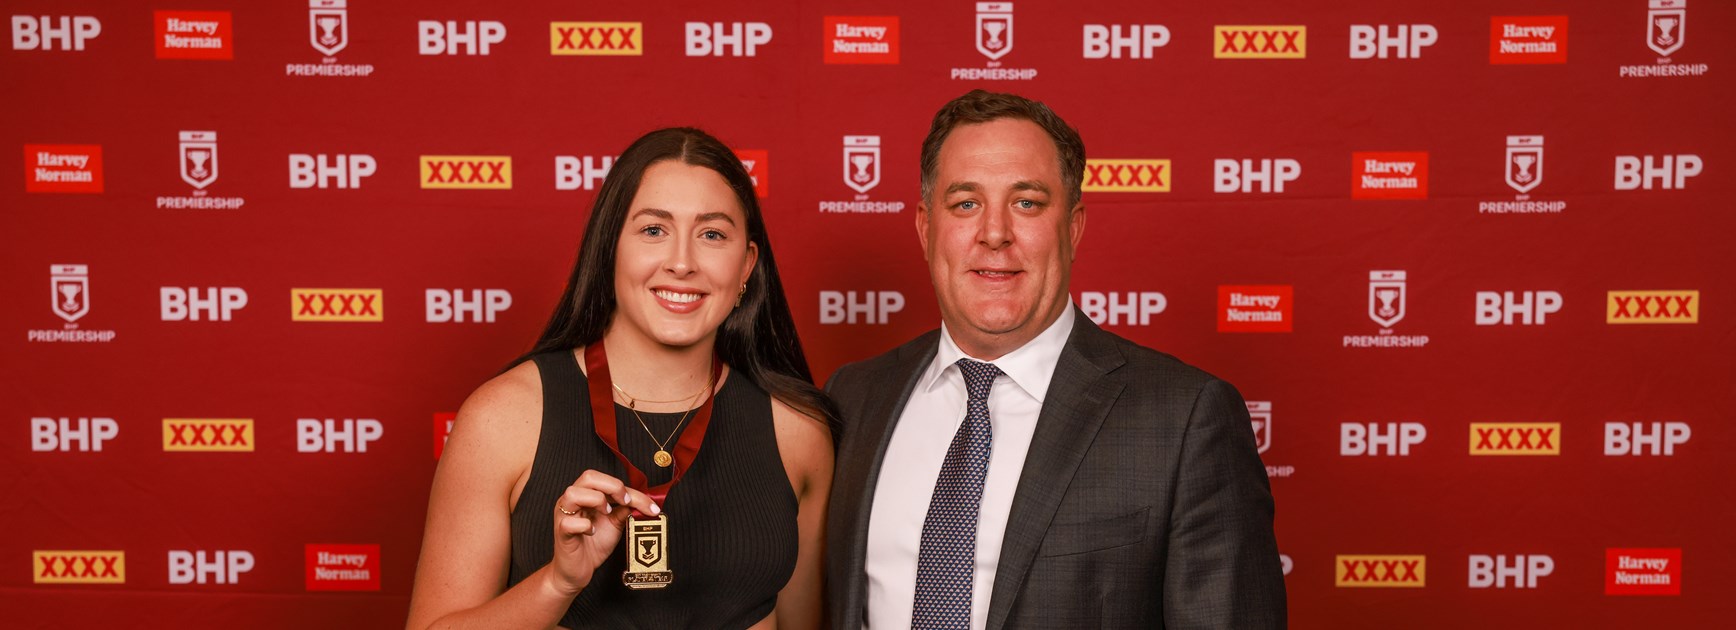 2021 BHP Premiership Player of the Year Romy Teitzel with incoming QRL chief executive officer Rohan Sawyer. Photo: Peter Wallis/QRL